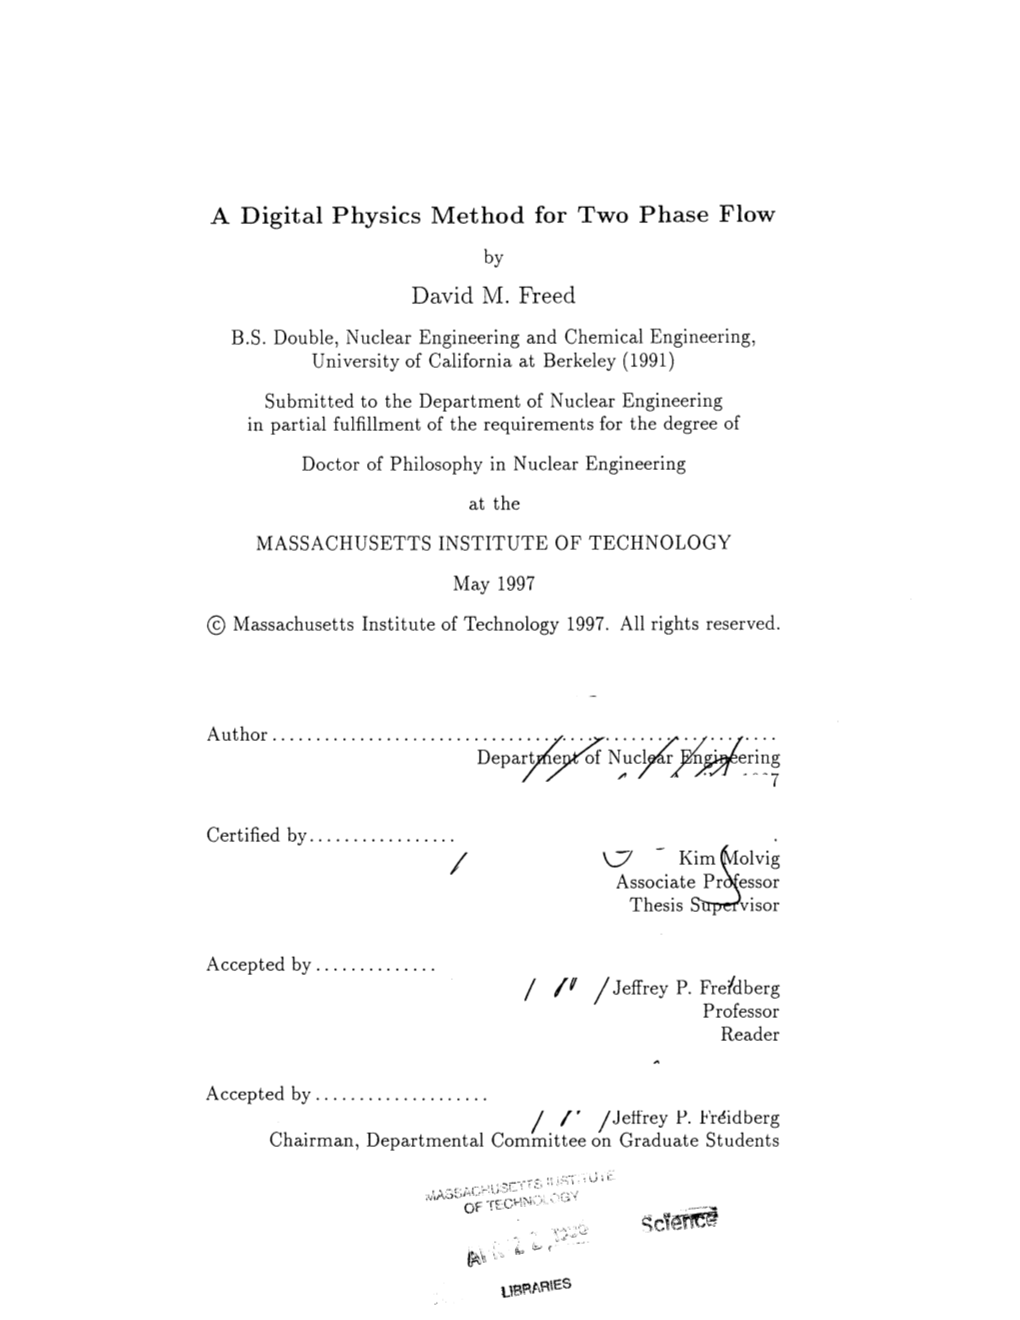 A Digital Physics Method for Two Phase Flow David